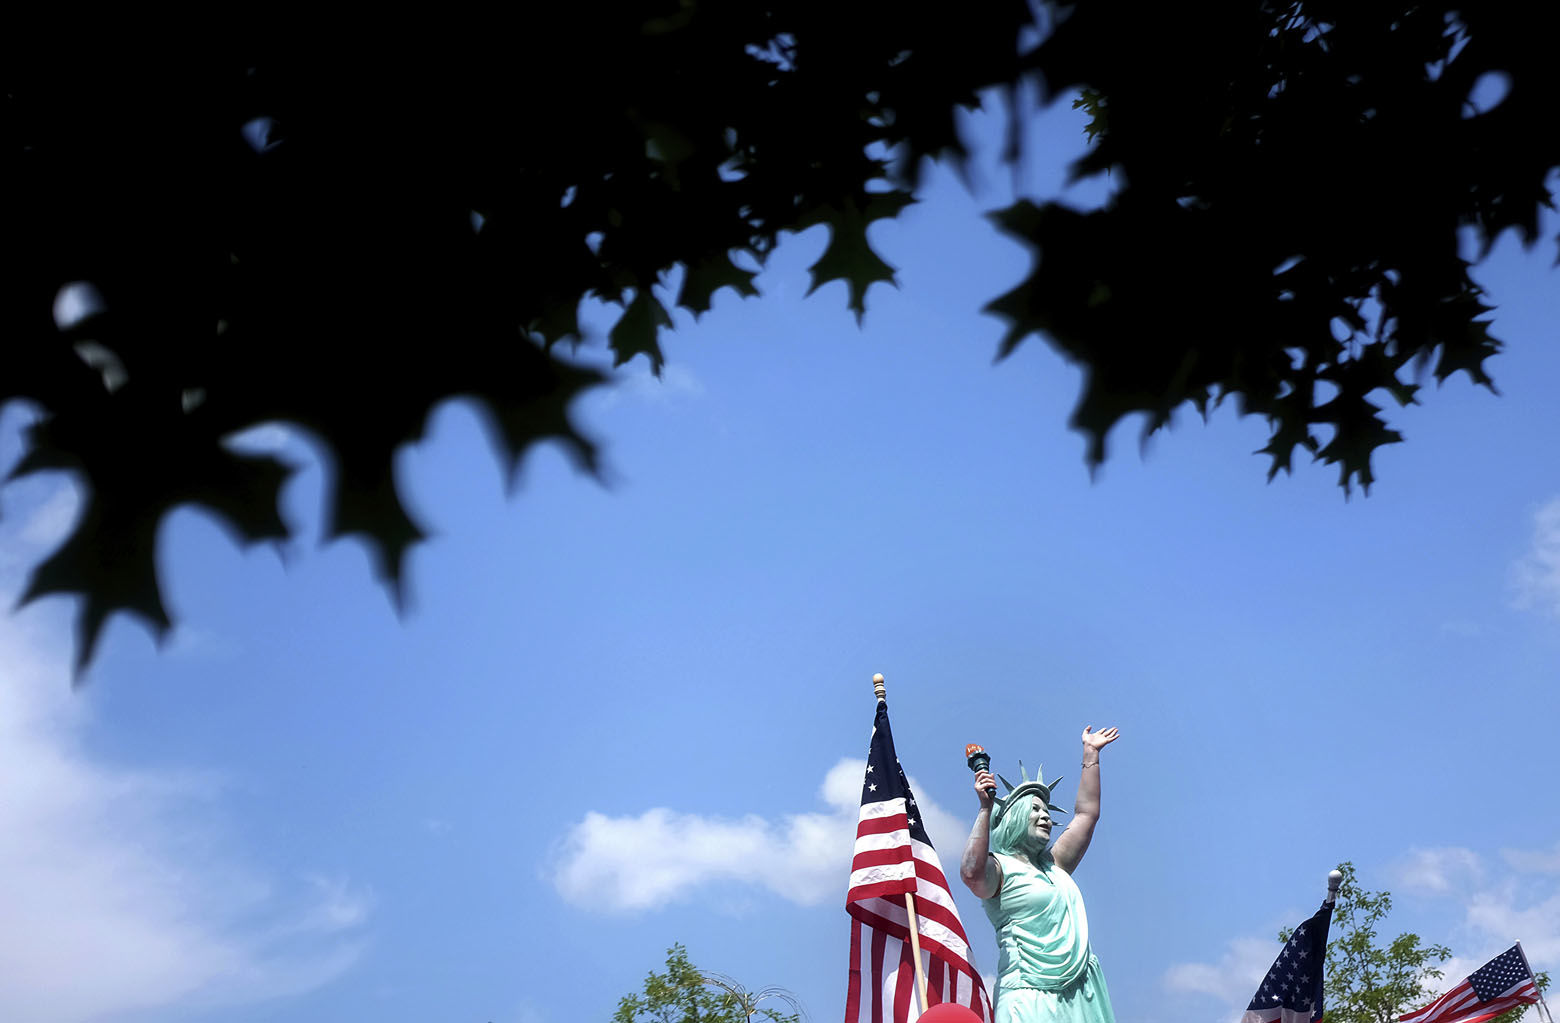 A woman dressed at the Statue of Liberty waves to the crowd while riding on a float in the Fourth of July parade in Marietta, Ga., Wednesday, July 4, 2018. (AP Photo/David Goldman)